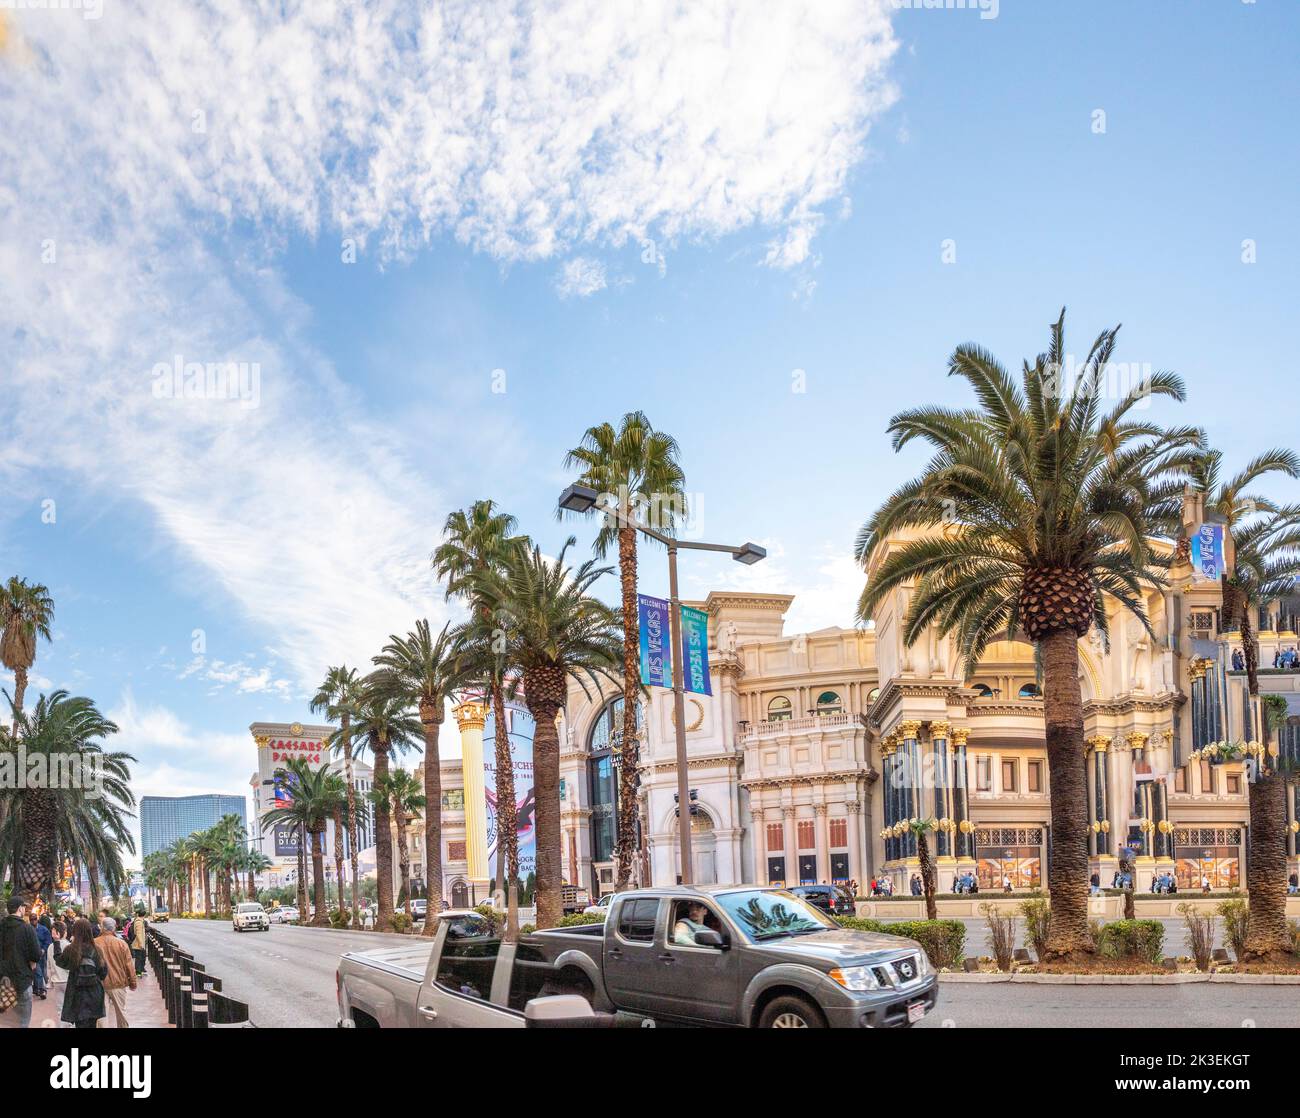 Las Vegas, USA - March 9, 2019: view to facade of casinos and shopping center at the Strip in Las Vegas, USA. Stock Photo